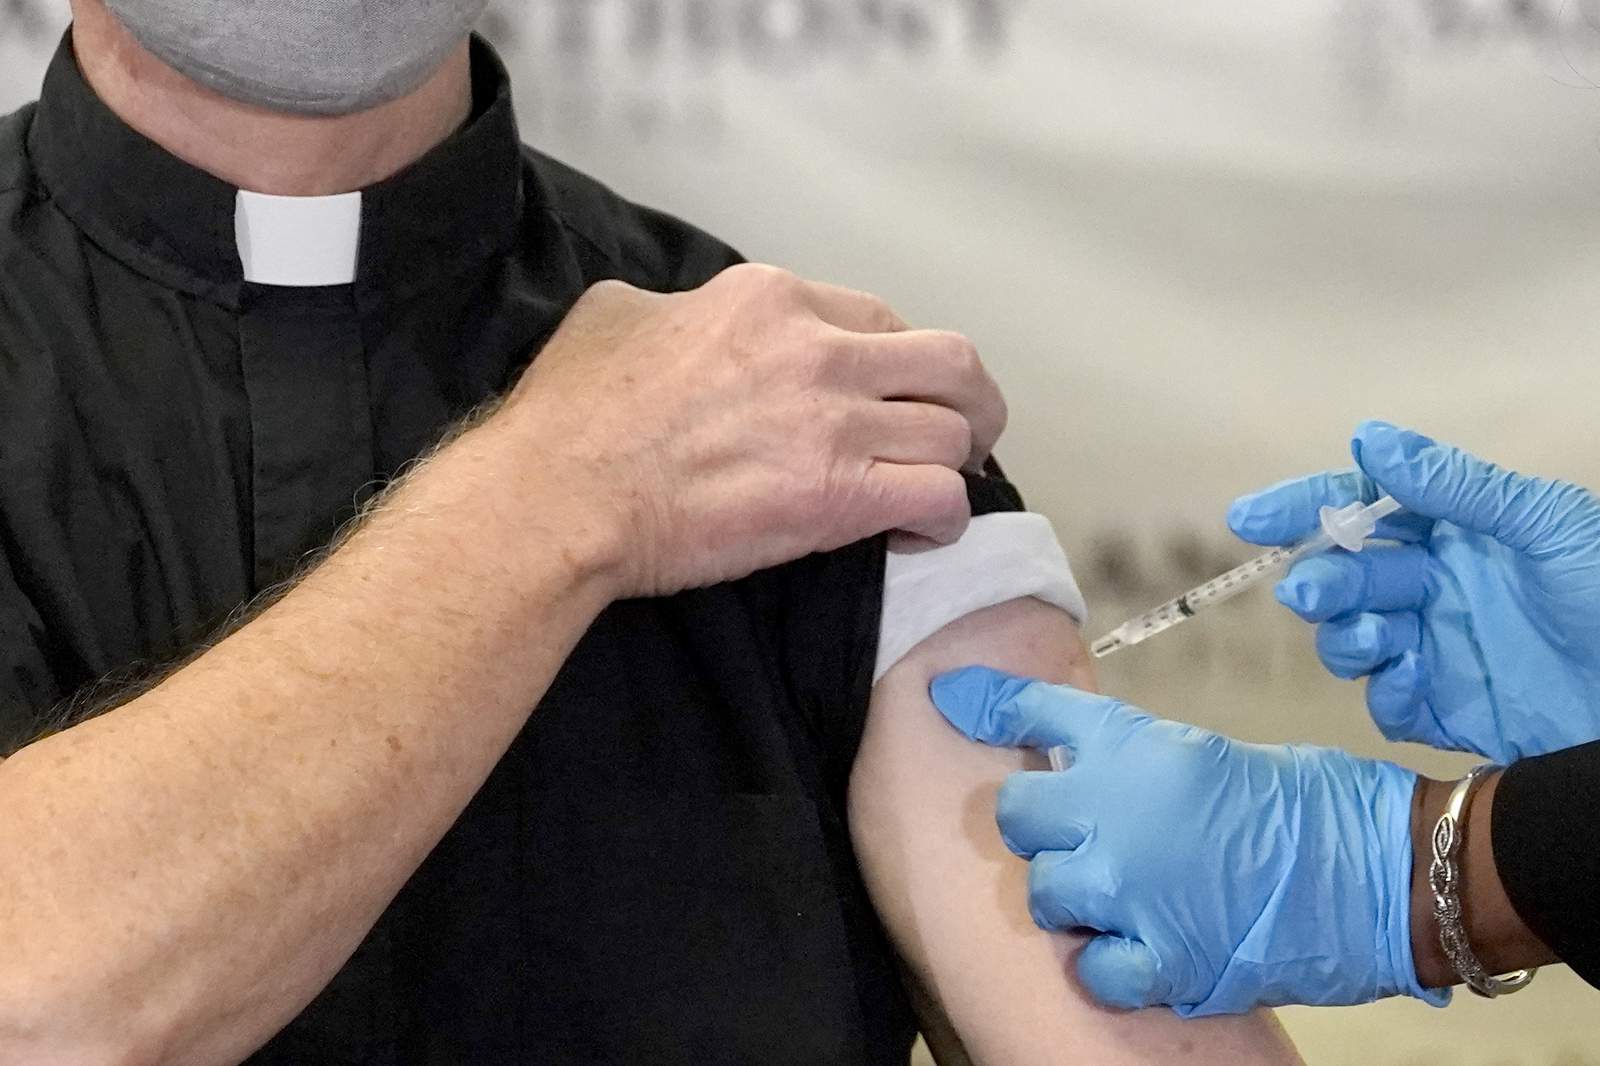 Anti-abortion faith leaders support use of COVID-19 vaccines